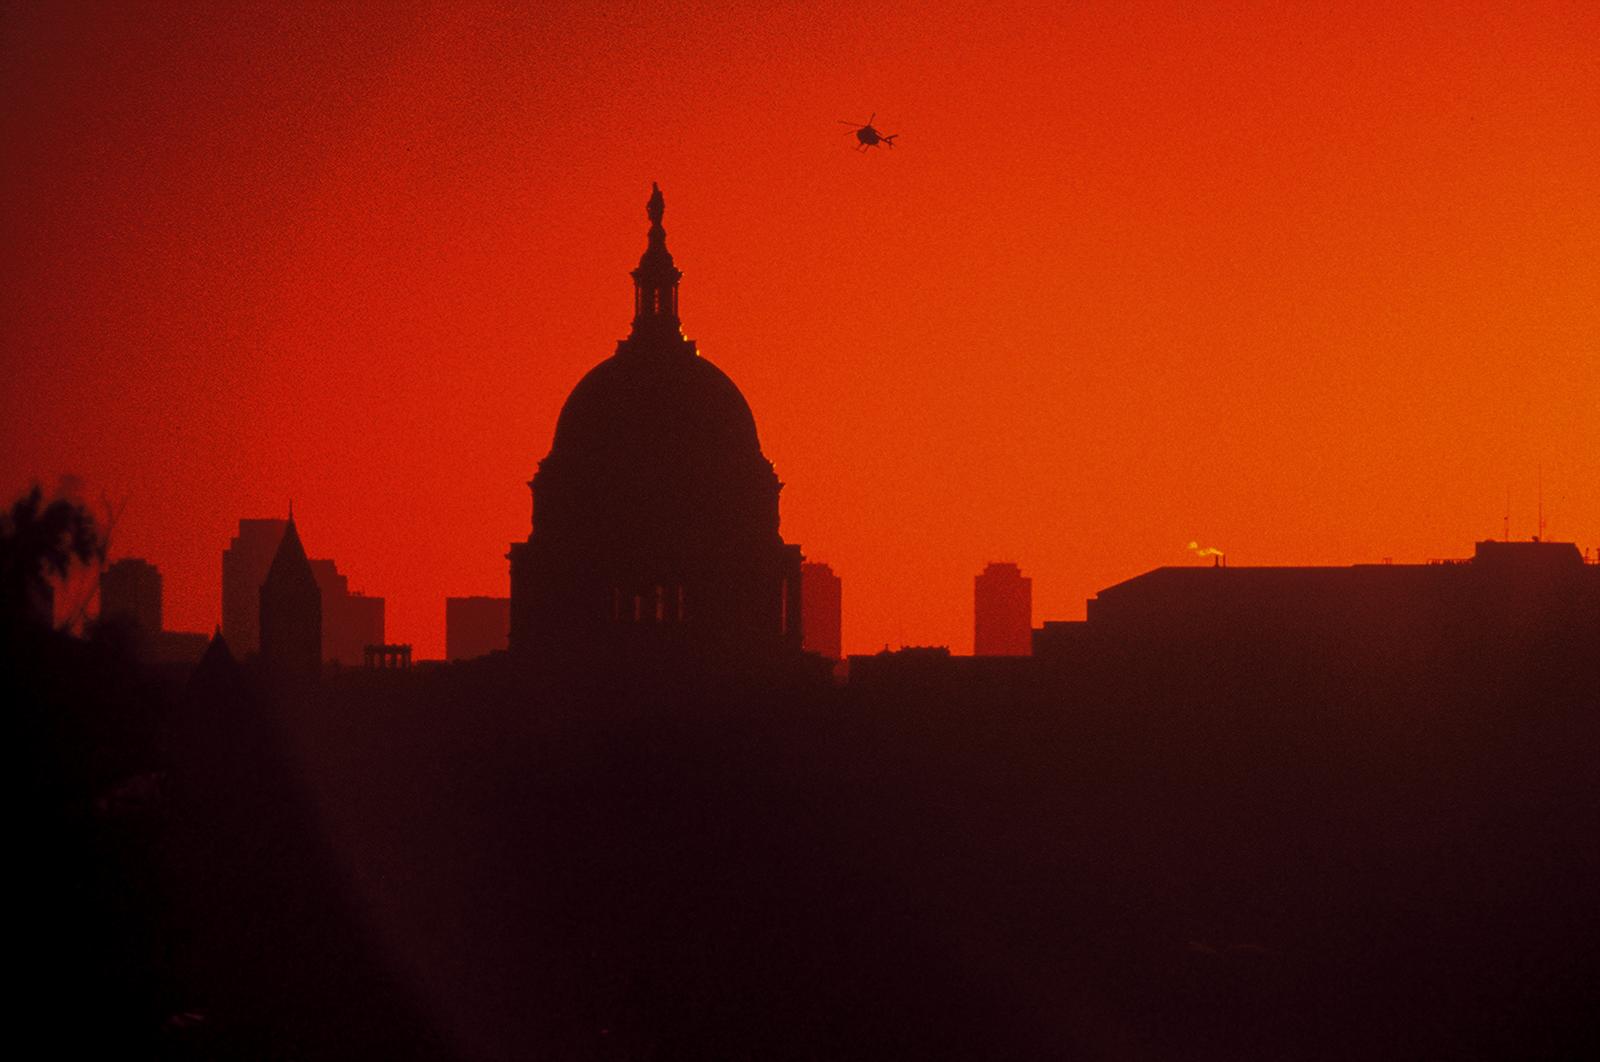 Capitol at sunset | Buy this image